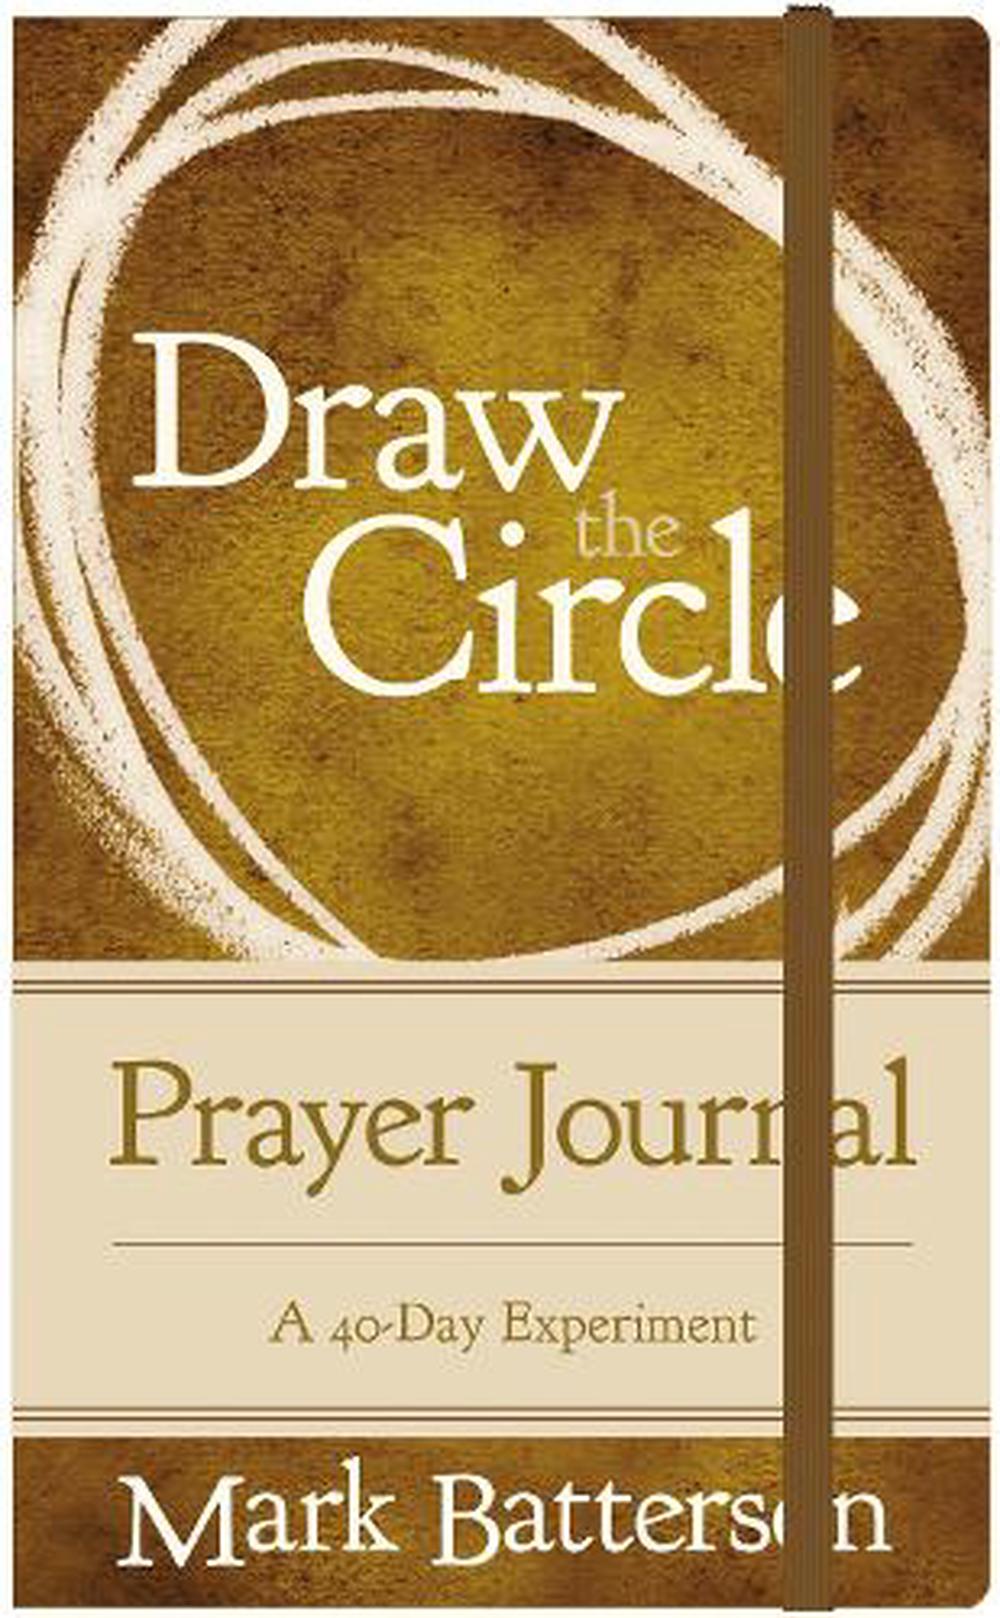 Draw the Circle Prayer Journal by Mark Batterson, Hardcover